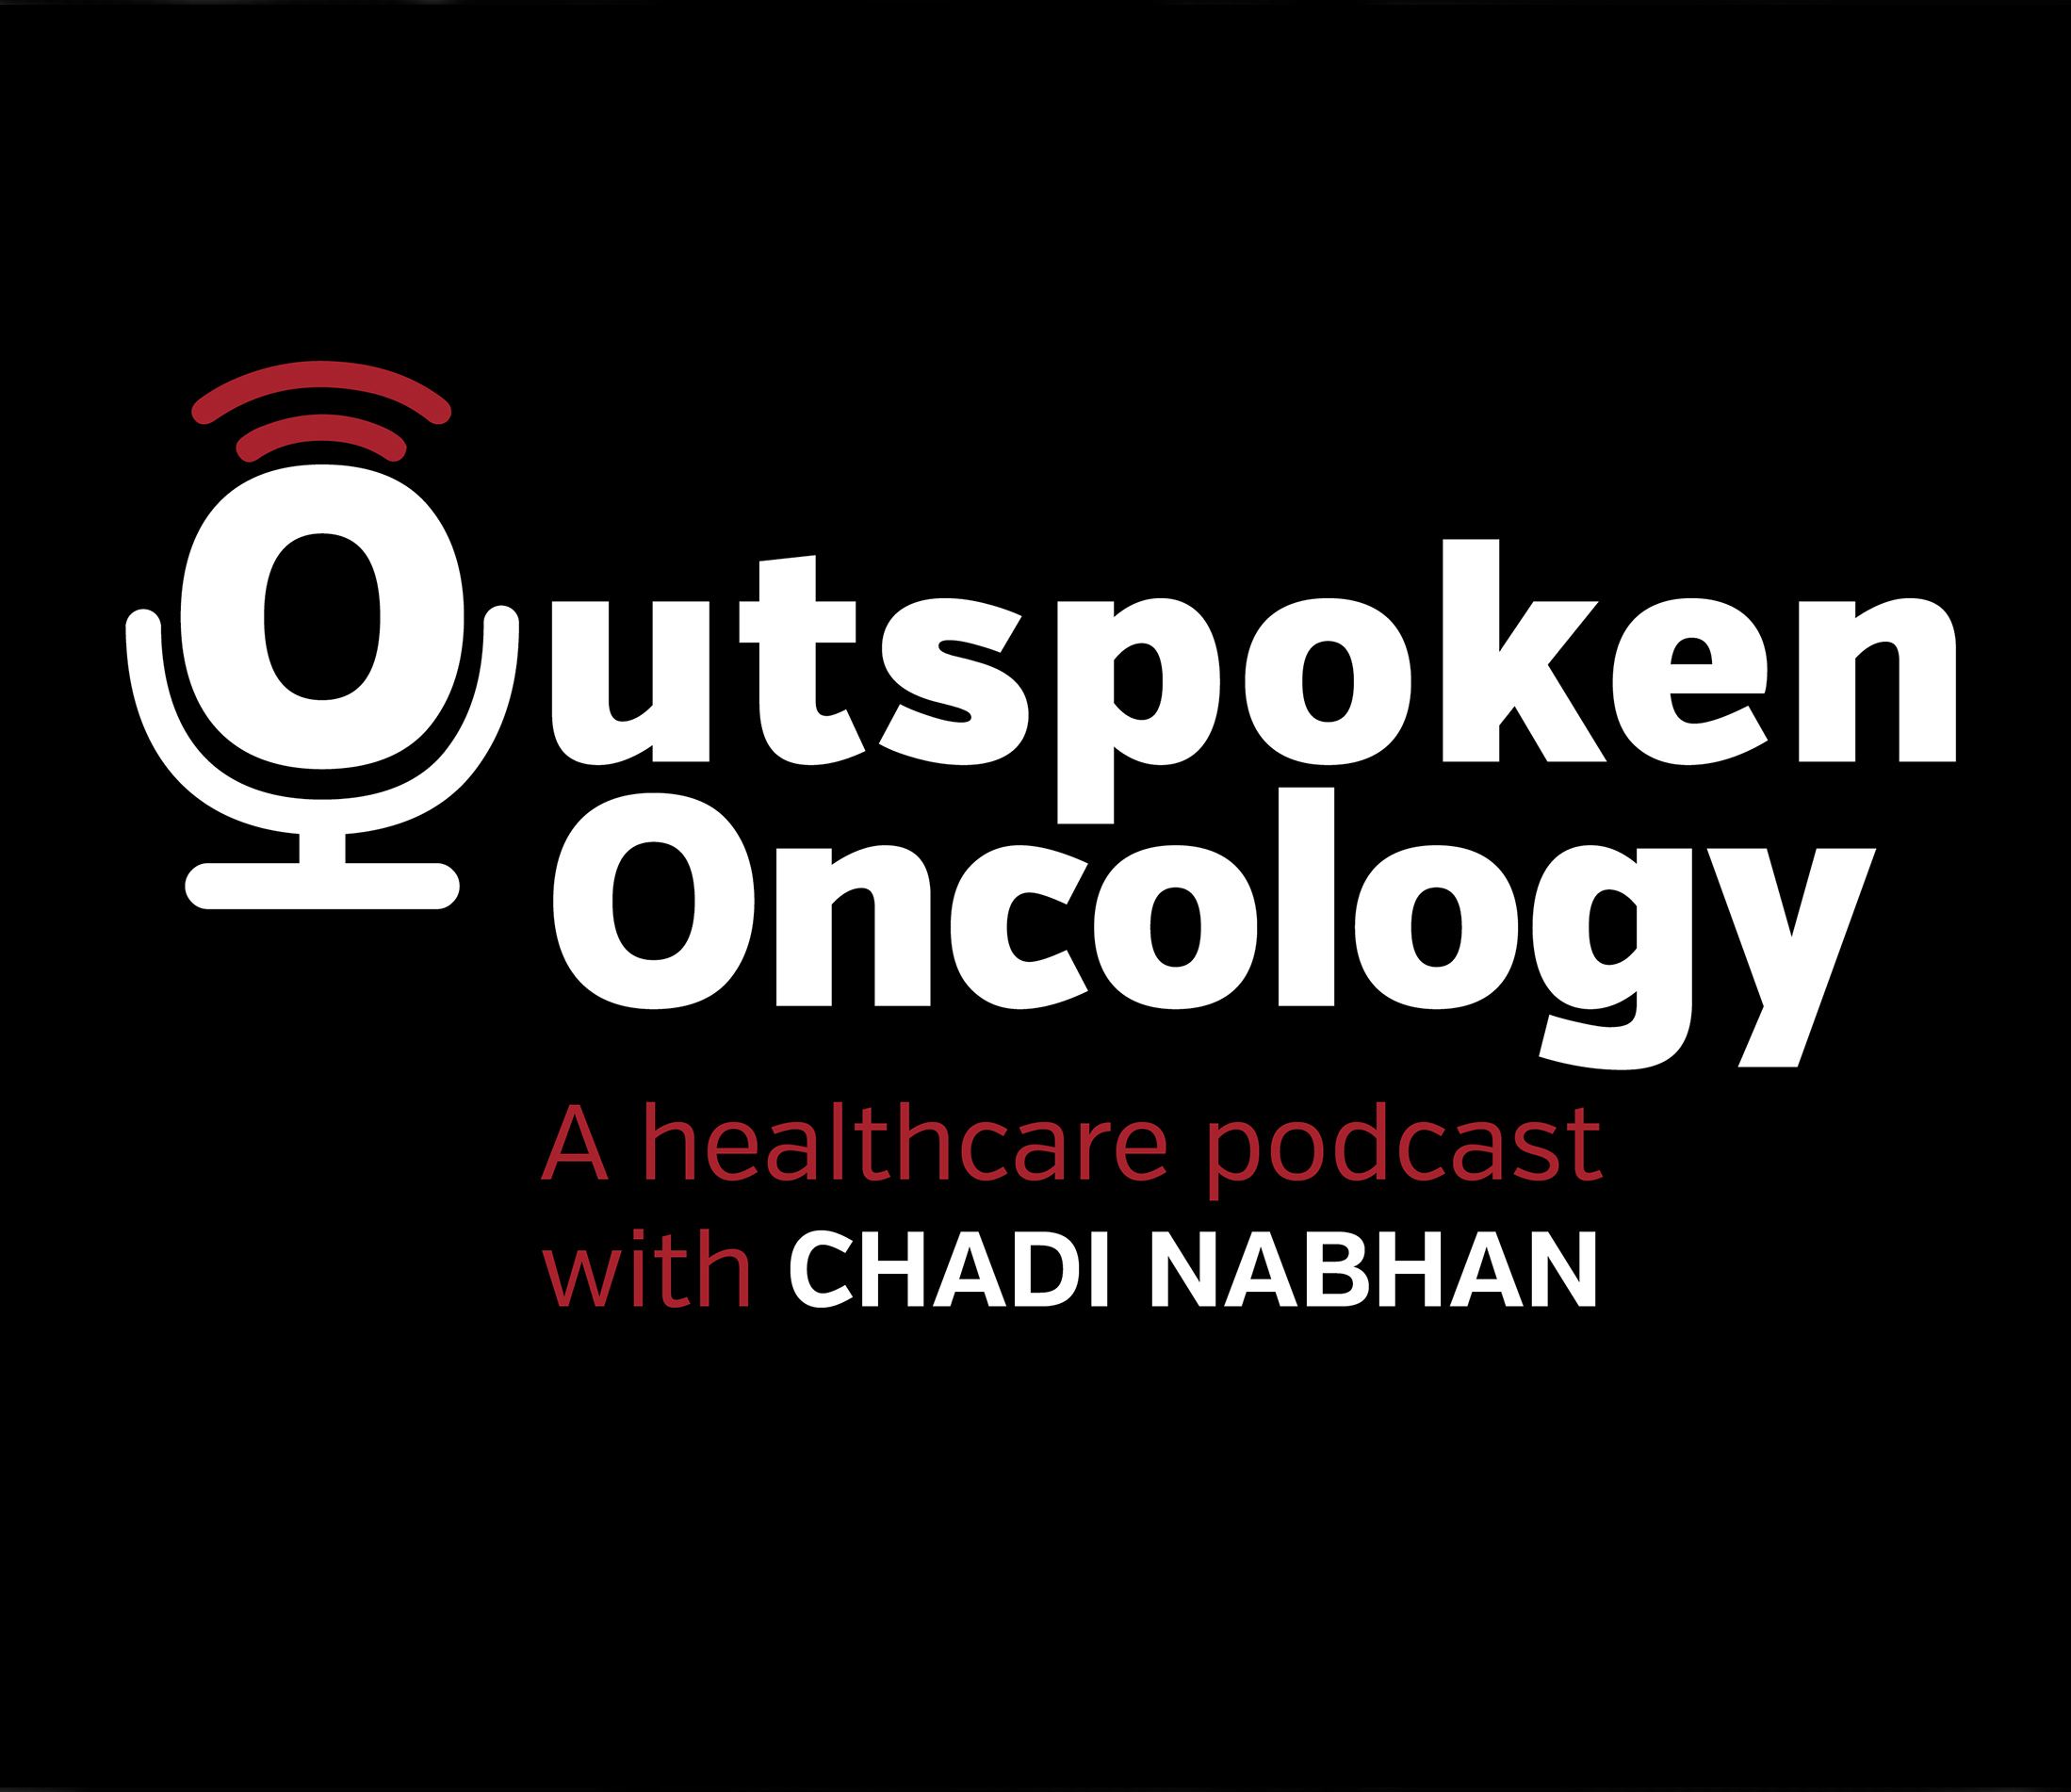 Outspoken Oncology